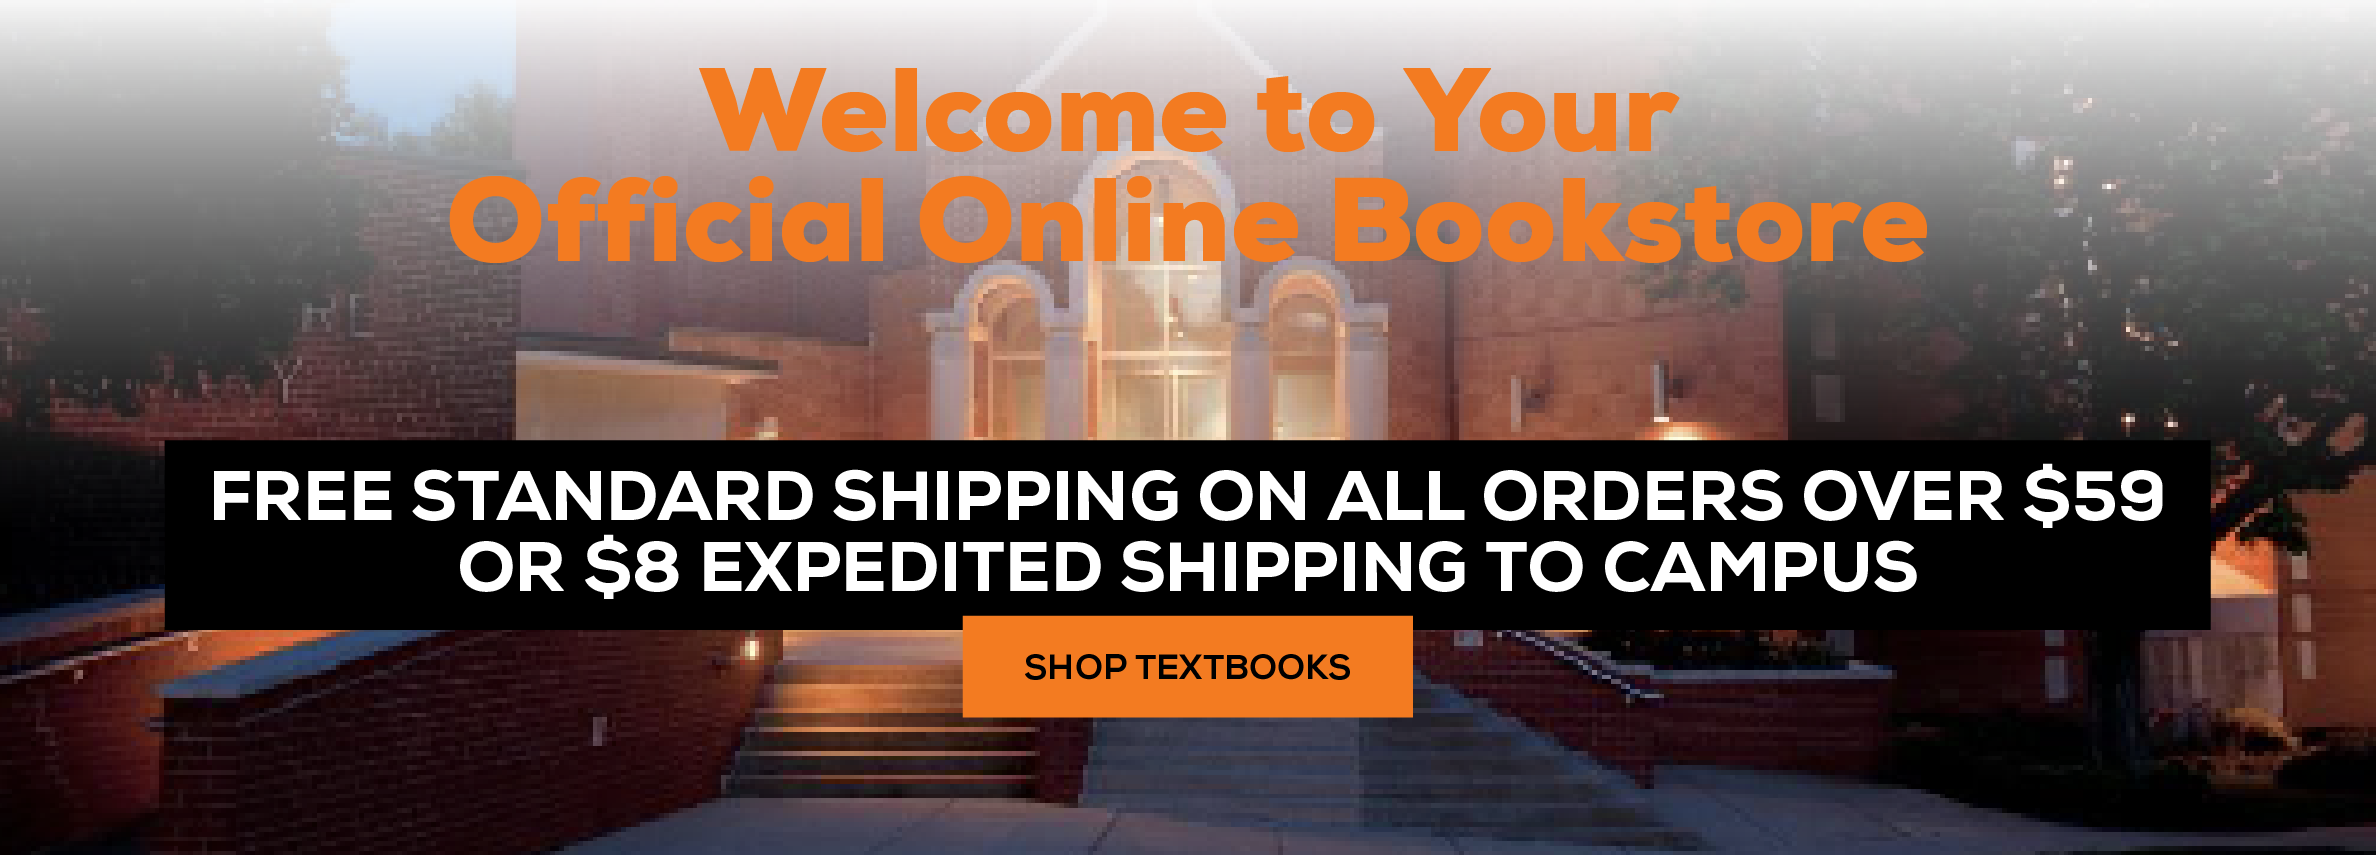 Welcome to your official online bookstore. Free Standard shipping on all orders over $59 or $8 Expedited shipping. shop textbooks (new tab)